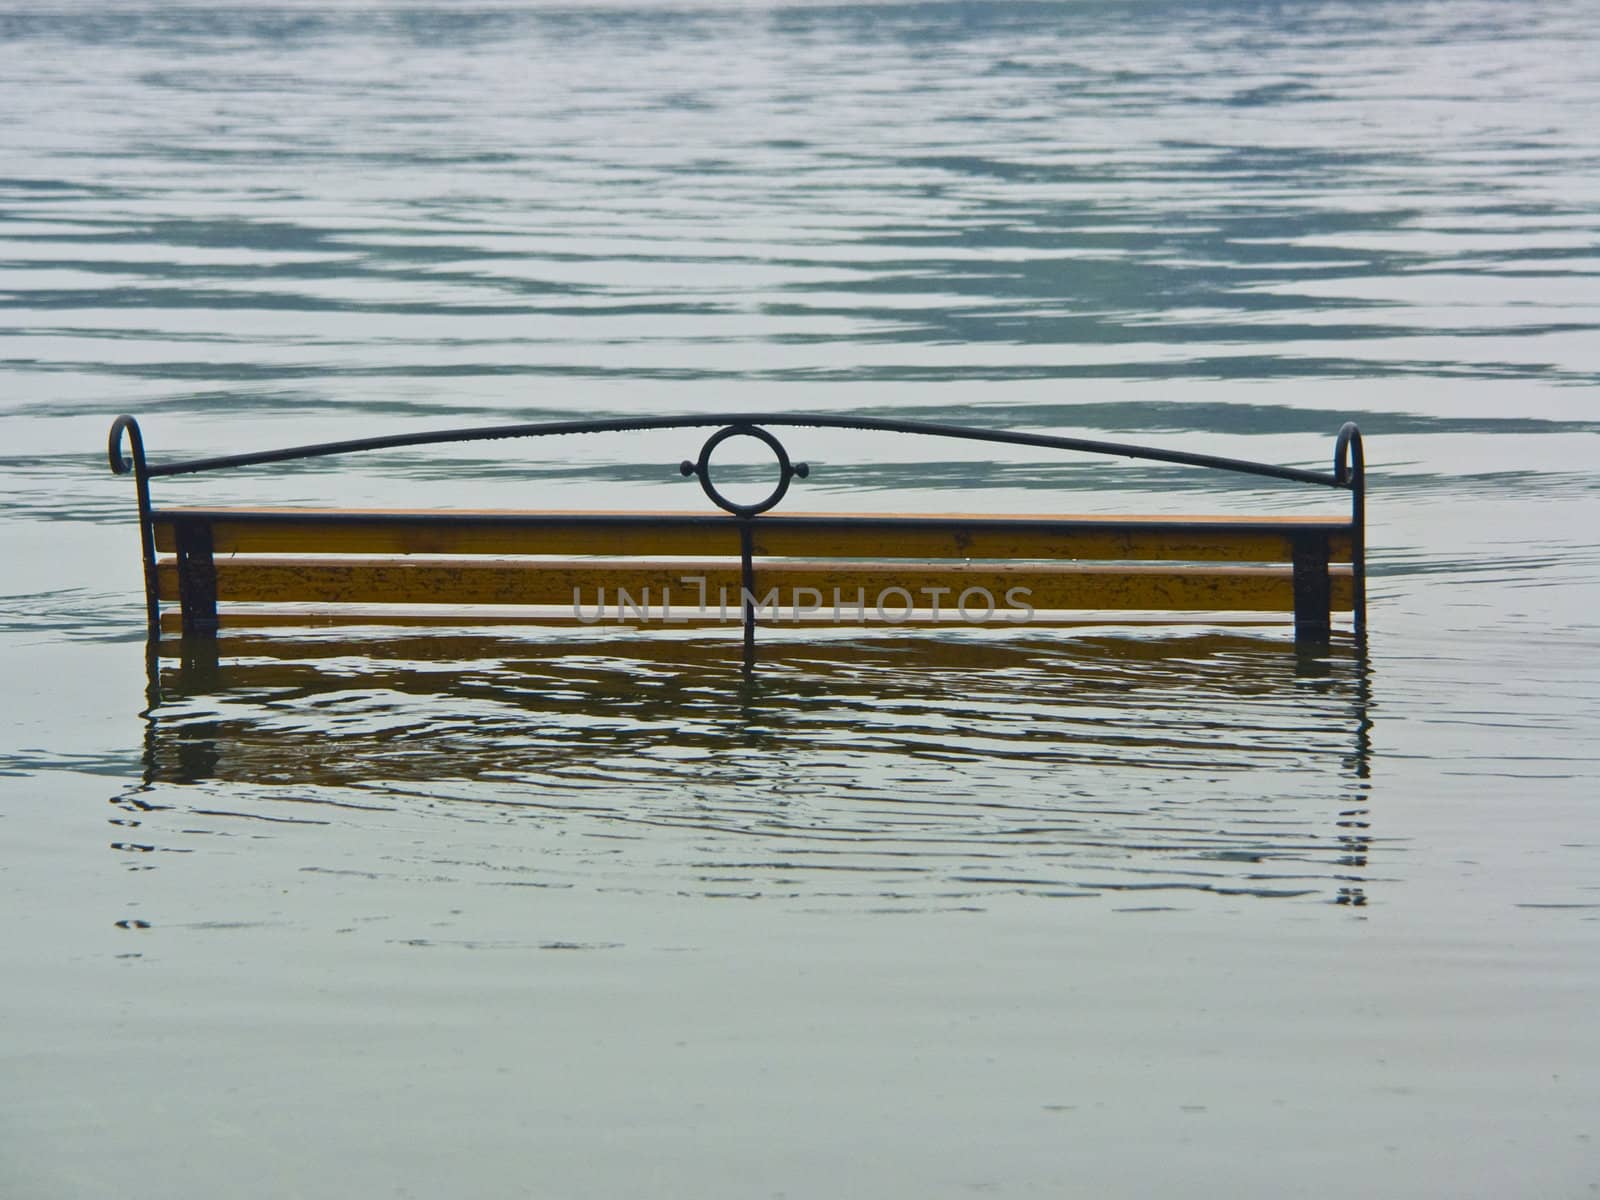  The image of the bench flooded by water.